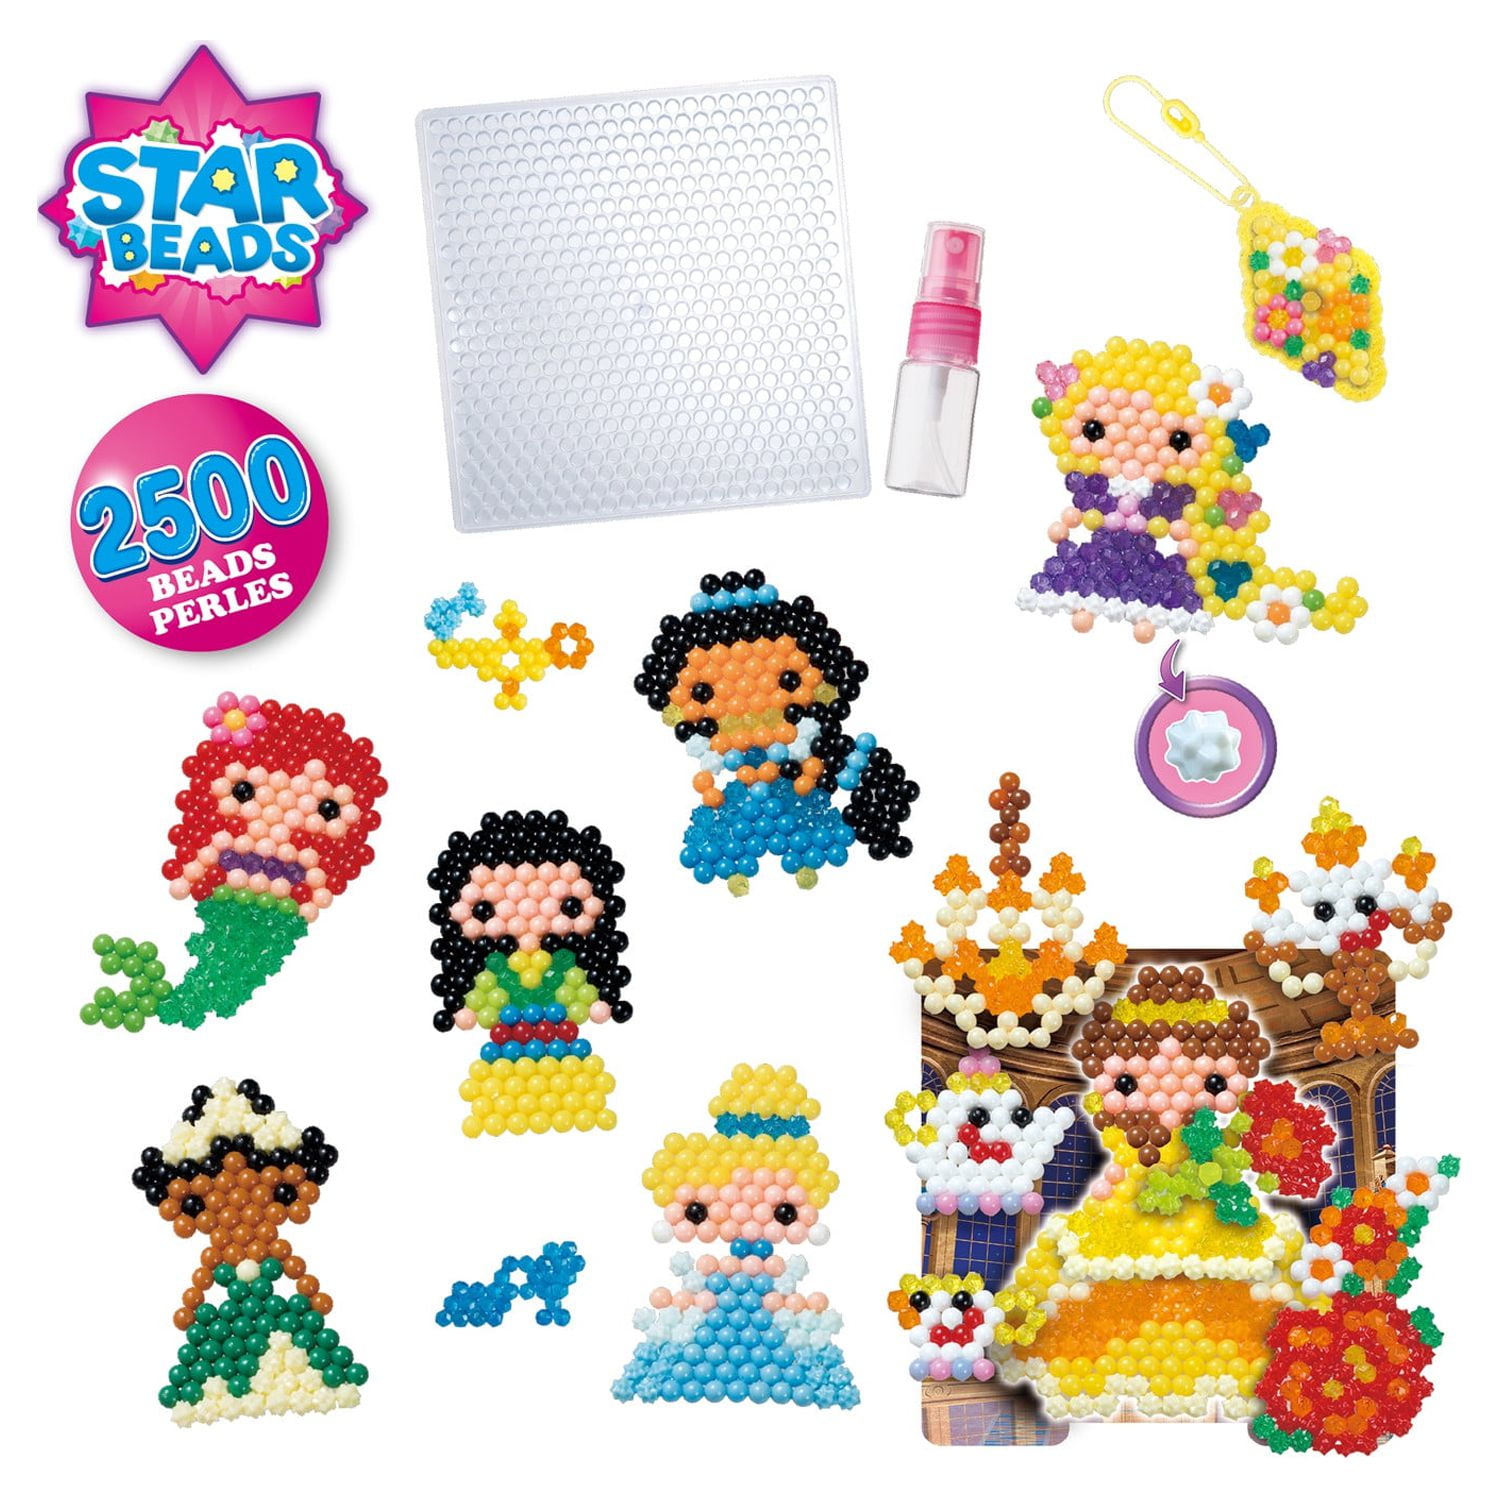 Aquabeads Enchanted World Complete Arts & Crafts Bead Kit fot Children-  over 1,000 beads & Display Stand